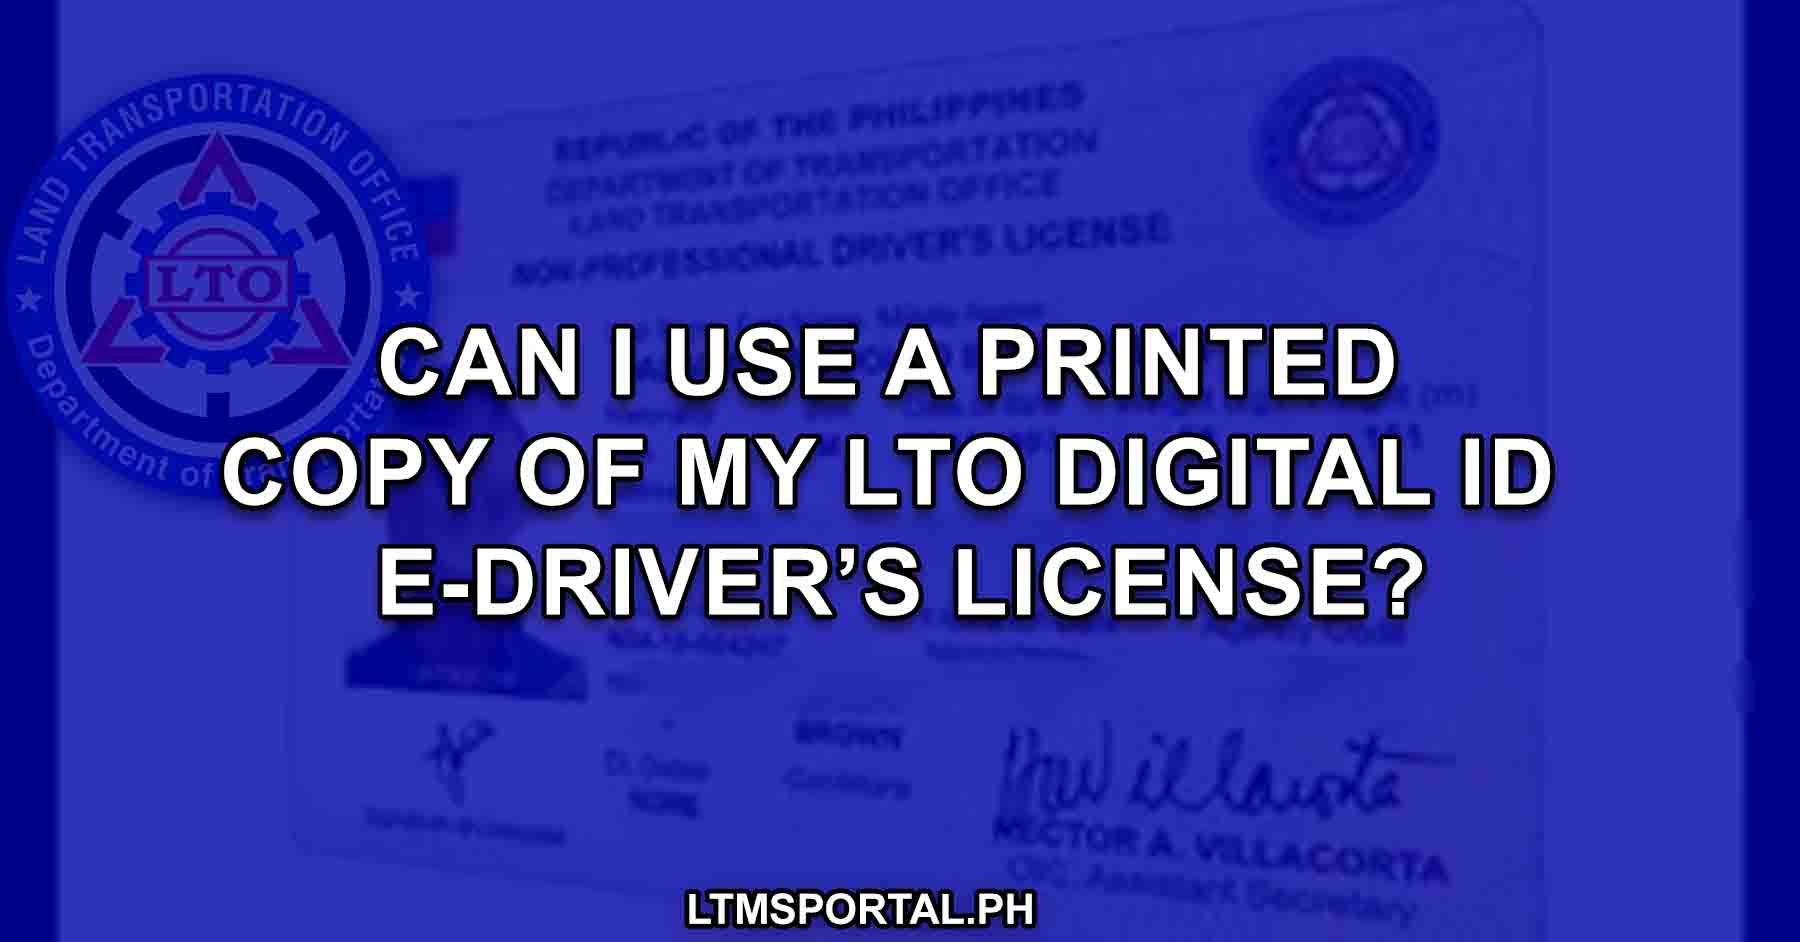 can i use a printed copy of my lto digital id edrivers license